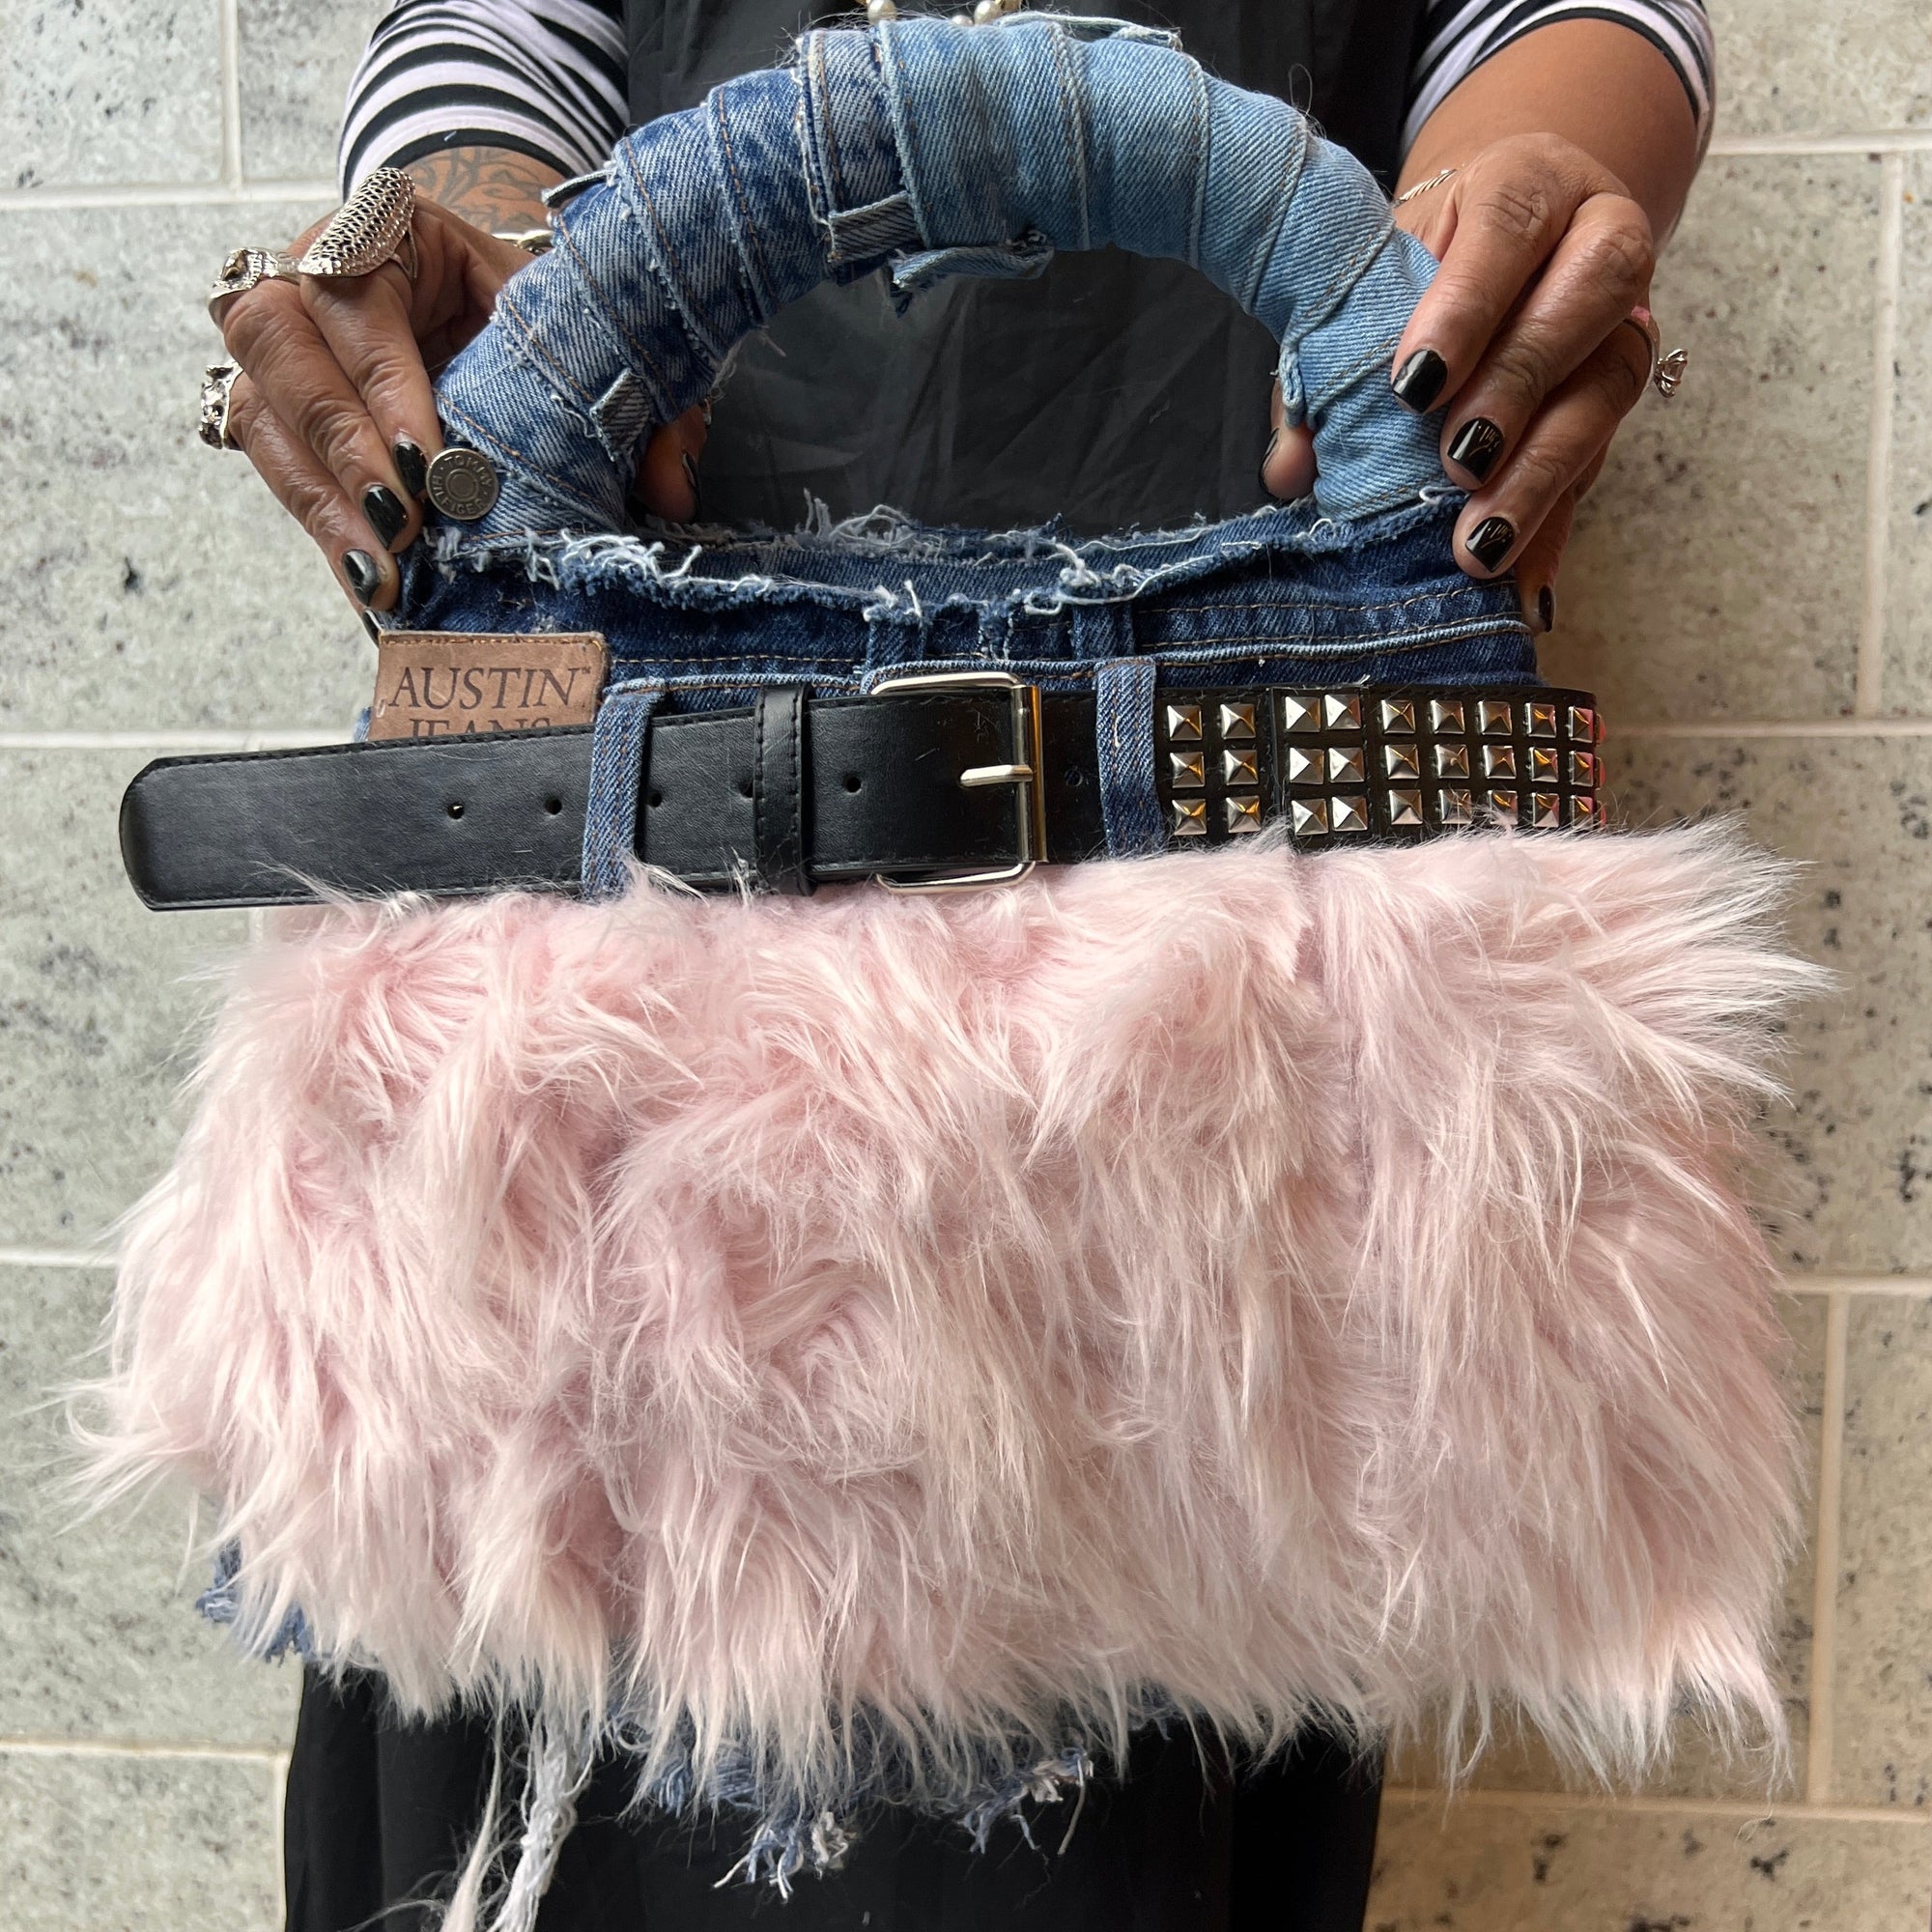 Its A No For Me Ugly Fluffy Denim Bag: Oddity Style